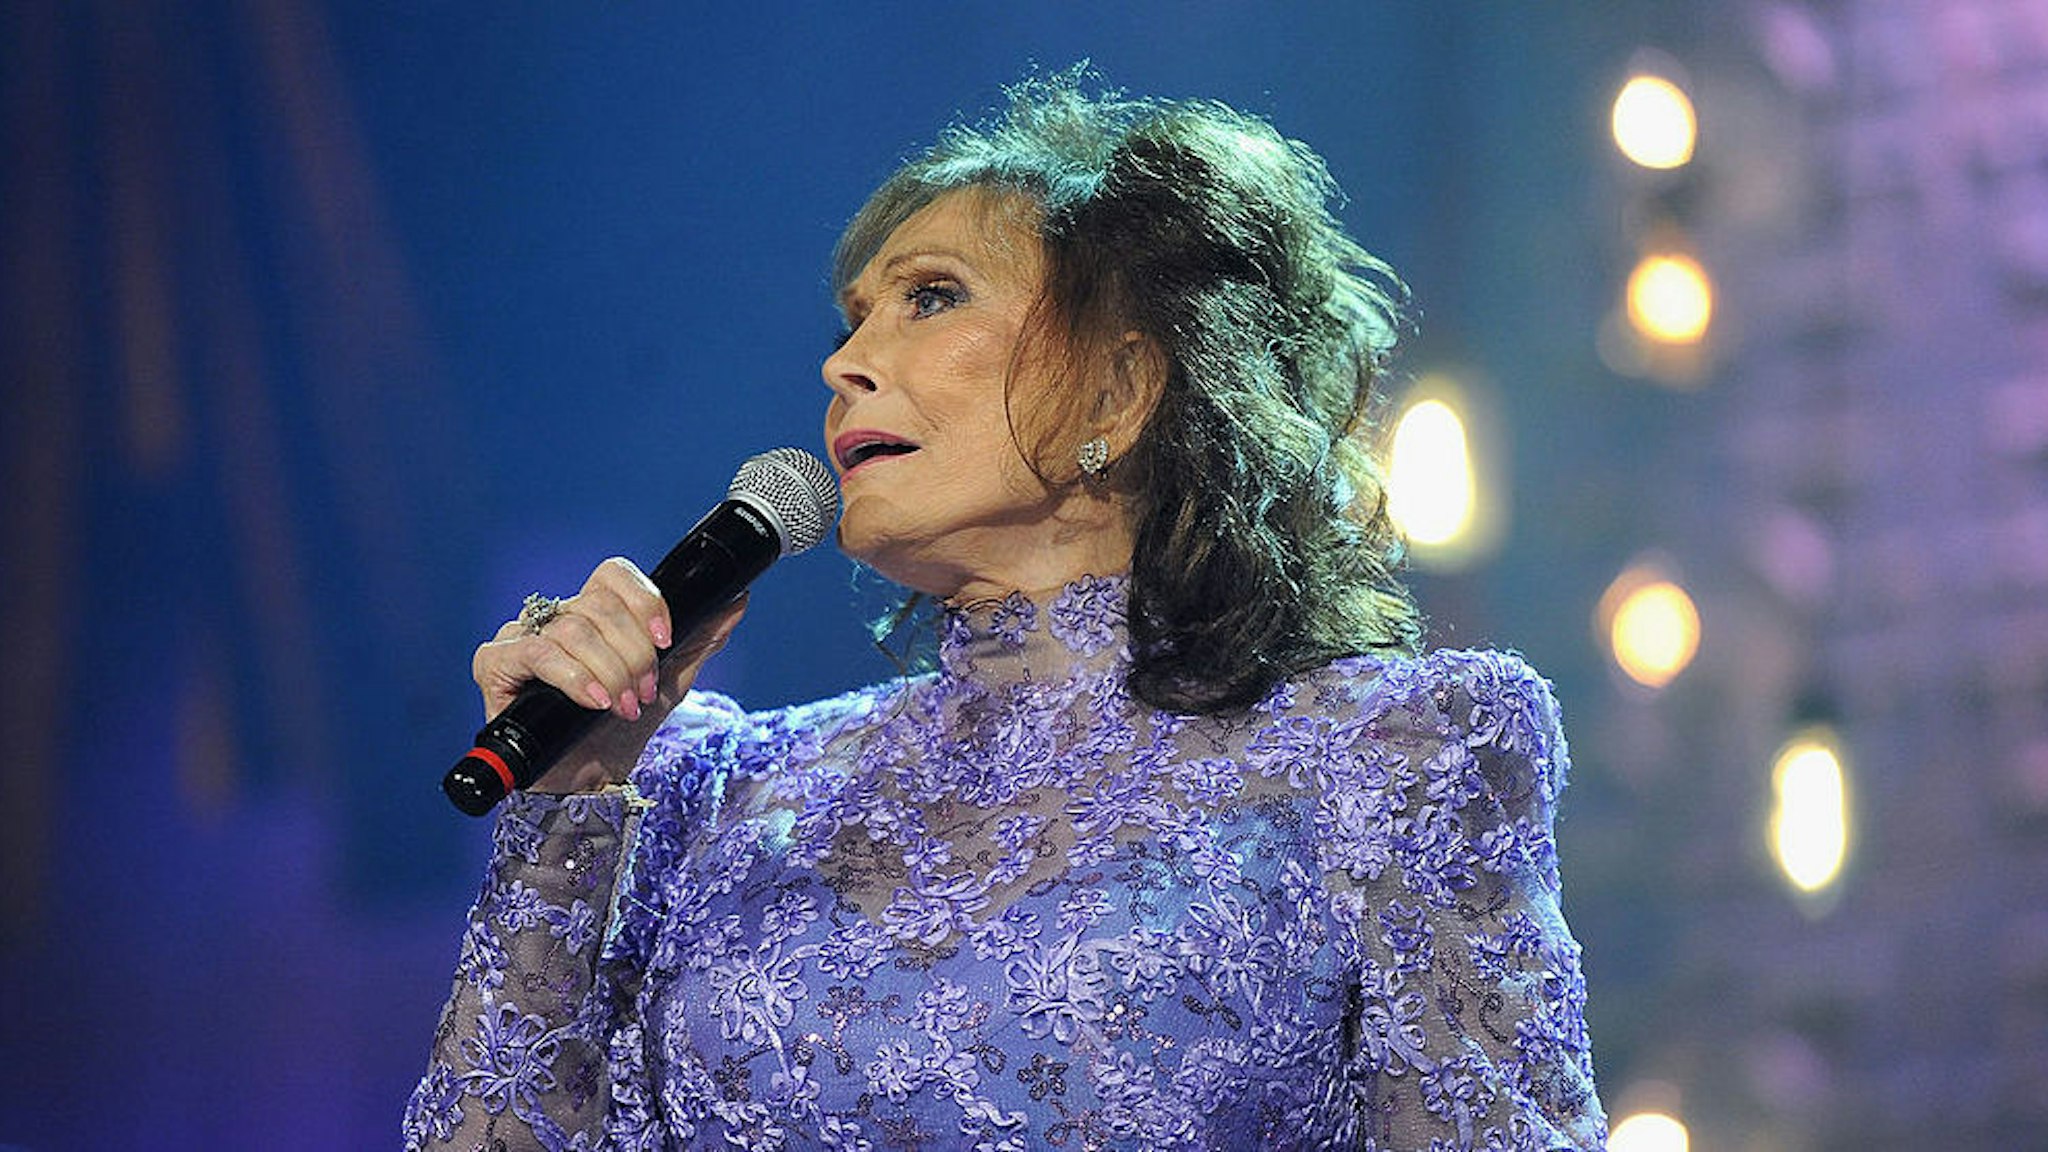 Loretta Lynn performs onstage at the 13th annual Americana Music Association Honors and Awards Show at the Ryman Auditorium on September 17, 2014 in Nashville, Tennessee.